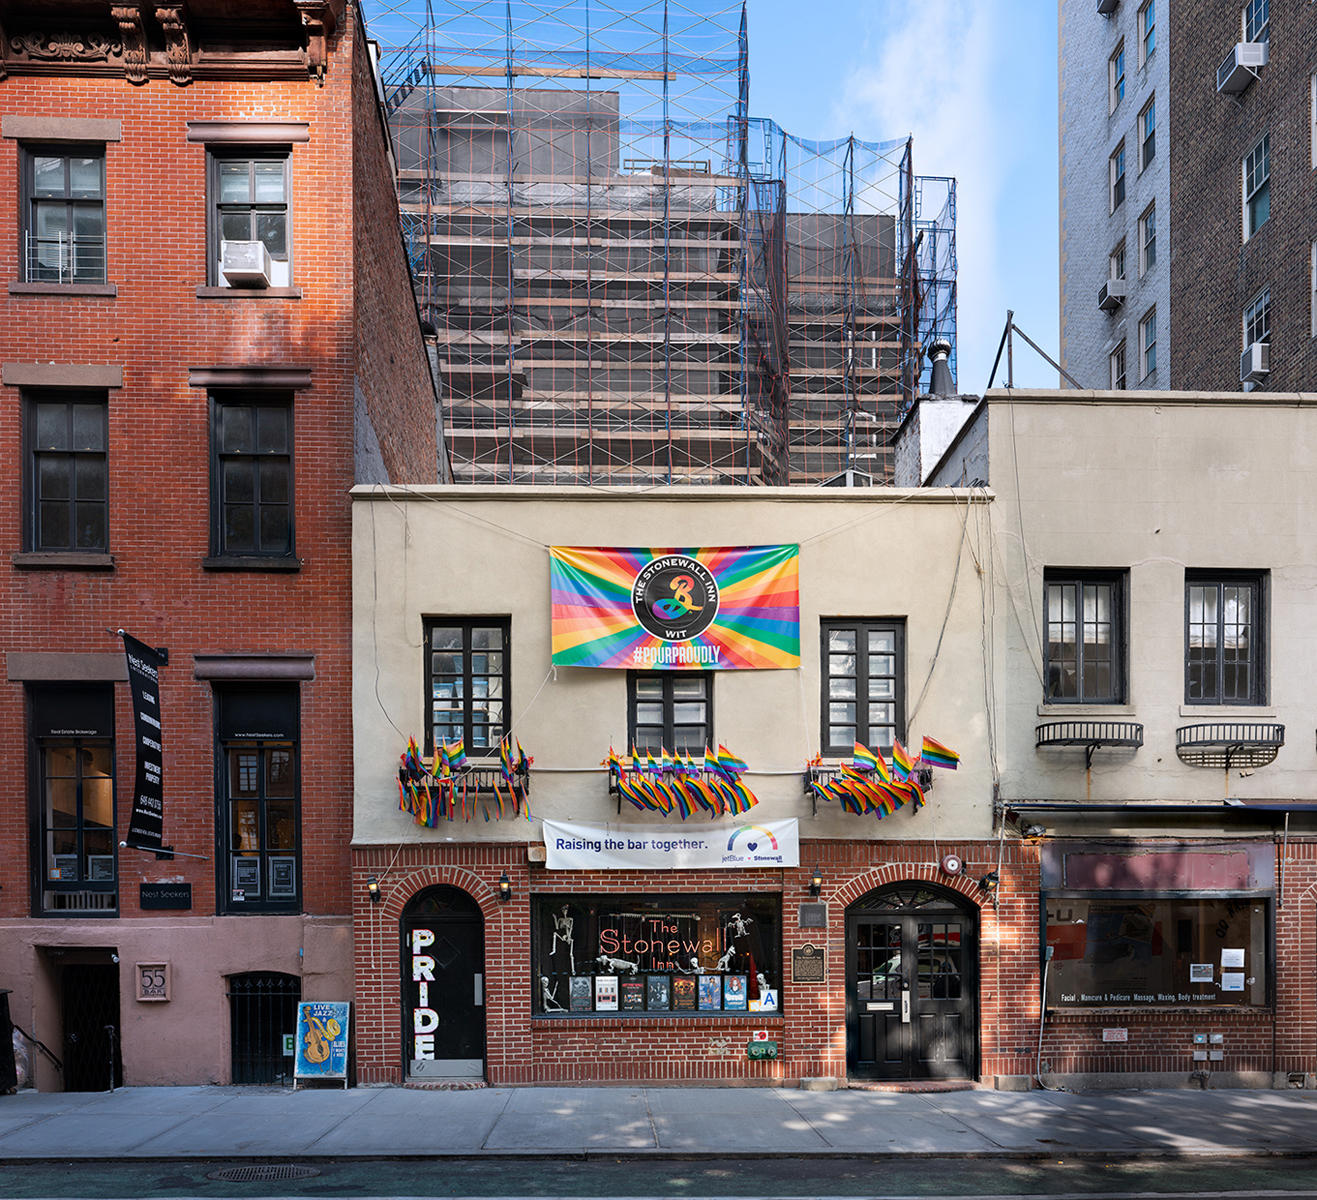 <div class="storycaption">
<div class="galleryIntroTextArea holder">
<div class="galleryIntroTextContent">
<div class="galleryIntroTextContentInside">
<div class="frishhead">
STONEWALL INN
</div>
<div class="frishsubhead">
NEW YORK CITY, NEW YORK
</div>
<div class="frishtext"> 
The Stonewall Inn in New York's Greenwich Village, site of the 1969 riots that launched the gay rights movement. A violent police raid in the early morning hours of June 28, 1969 led to series of demonstrations by members of the gay community, an important event leading to the modern fight for LBGTQ rights in the United States. Very few establishments welcomed openly gay people in the 1950s and 1960s. Those that did were often bars. Gay Americans also faced an anti-gay legal system. The last years of the 1960s, were very contentious, as many social/political movements were active, including the civil rights movement and the anti-war movement. After the Stonewall riots, gays and lesbians in New York City faced gender, race, class, and generational obstacles to becoming a cohesive community. Within six months, two gay activist organizations were formed in New York, concentrating on confrontational tactics, and three newspapers were established to promote rights for gays and lesbians.
<div class="frishdate">
PHOTOGRAPHED: 2018
</div>
</div>
</div>
</div>
</div> : IMAGES : Ghosts of Segregation